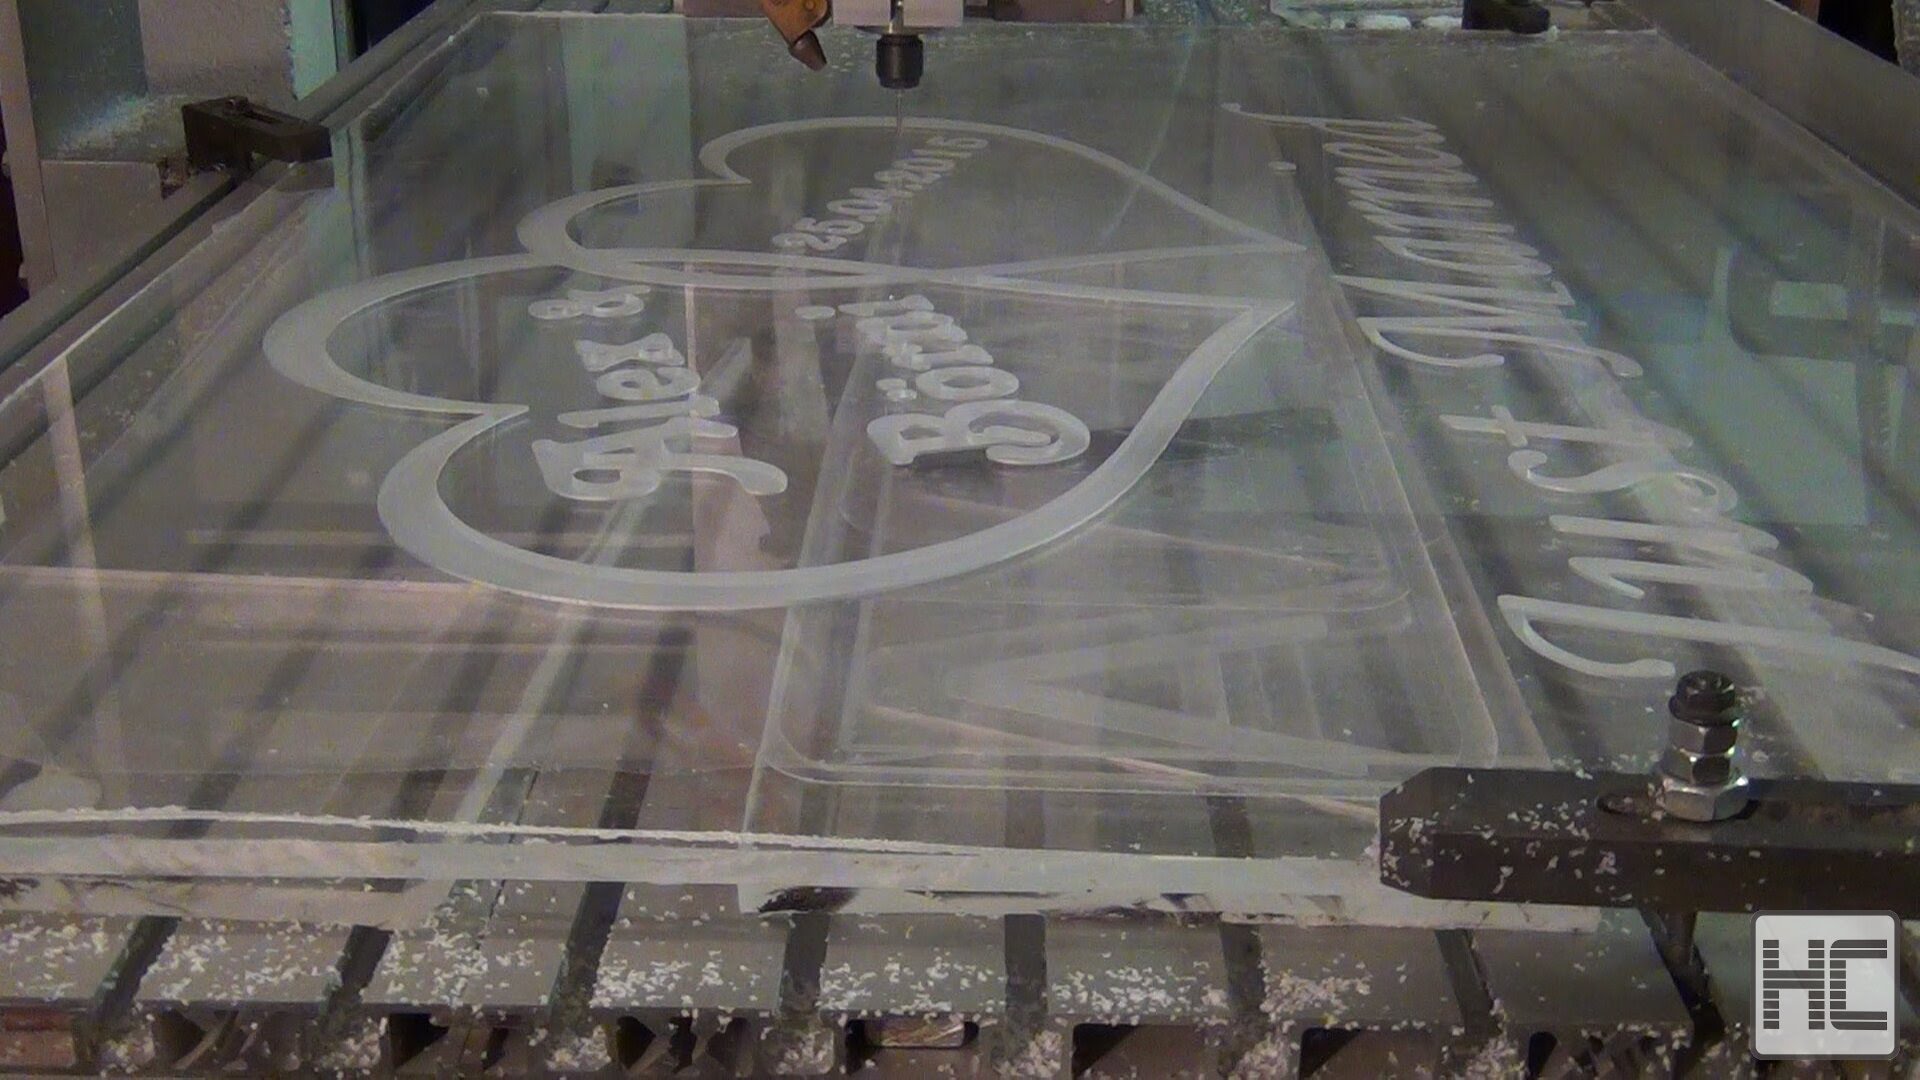 Video: Milling sign out of Plexiglass: Just Married